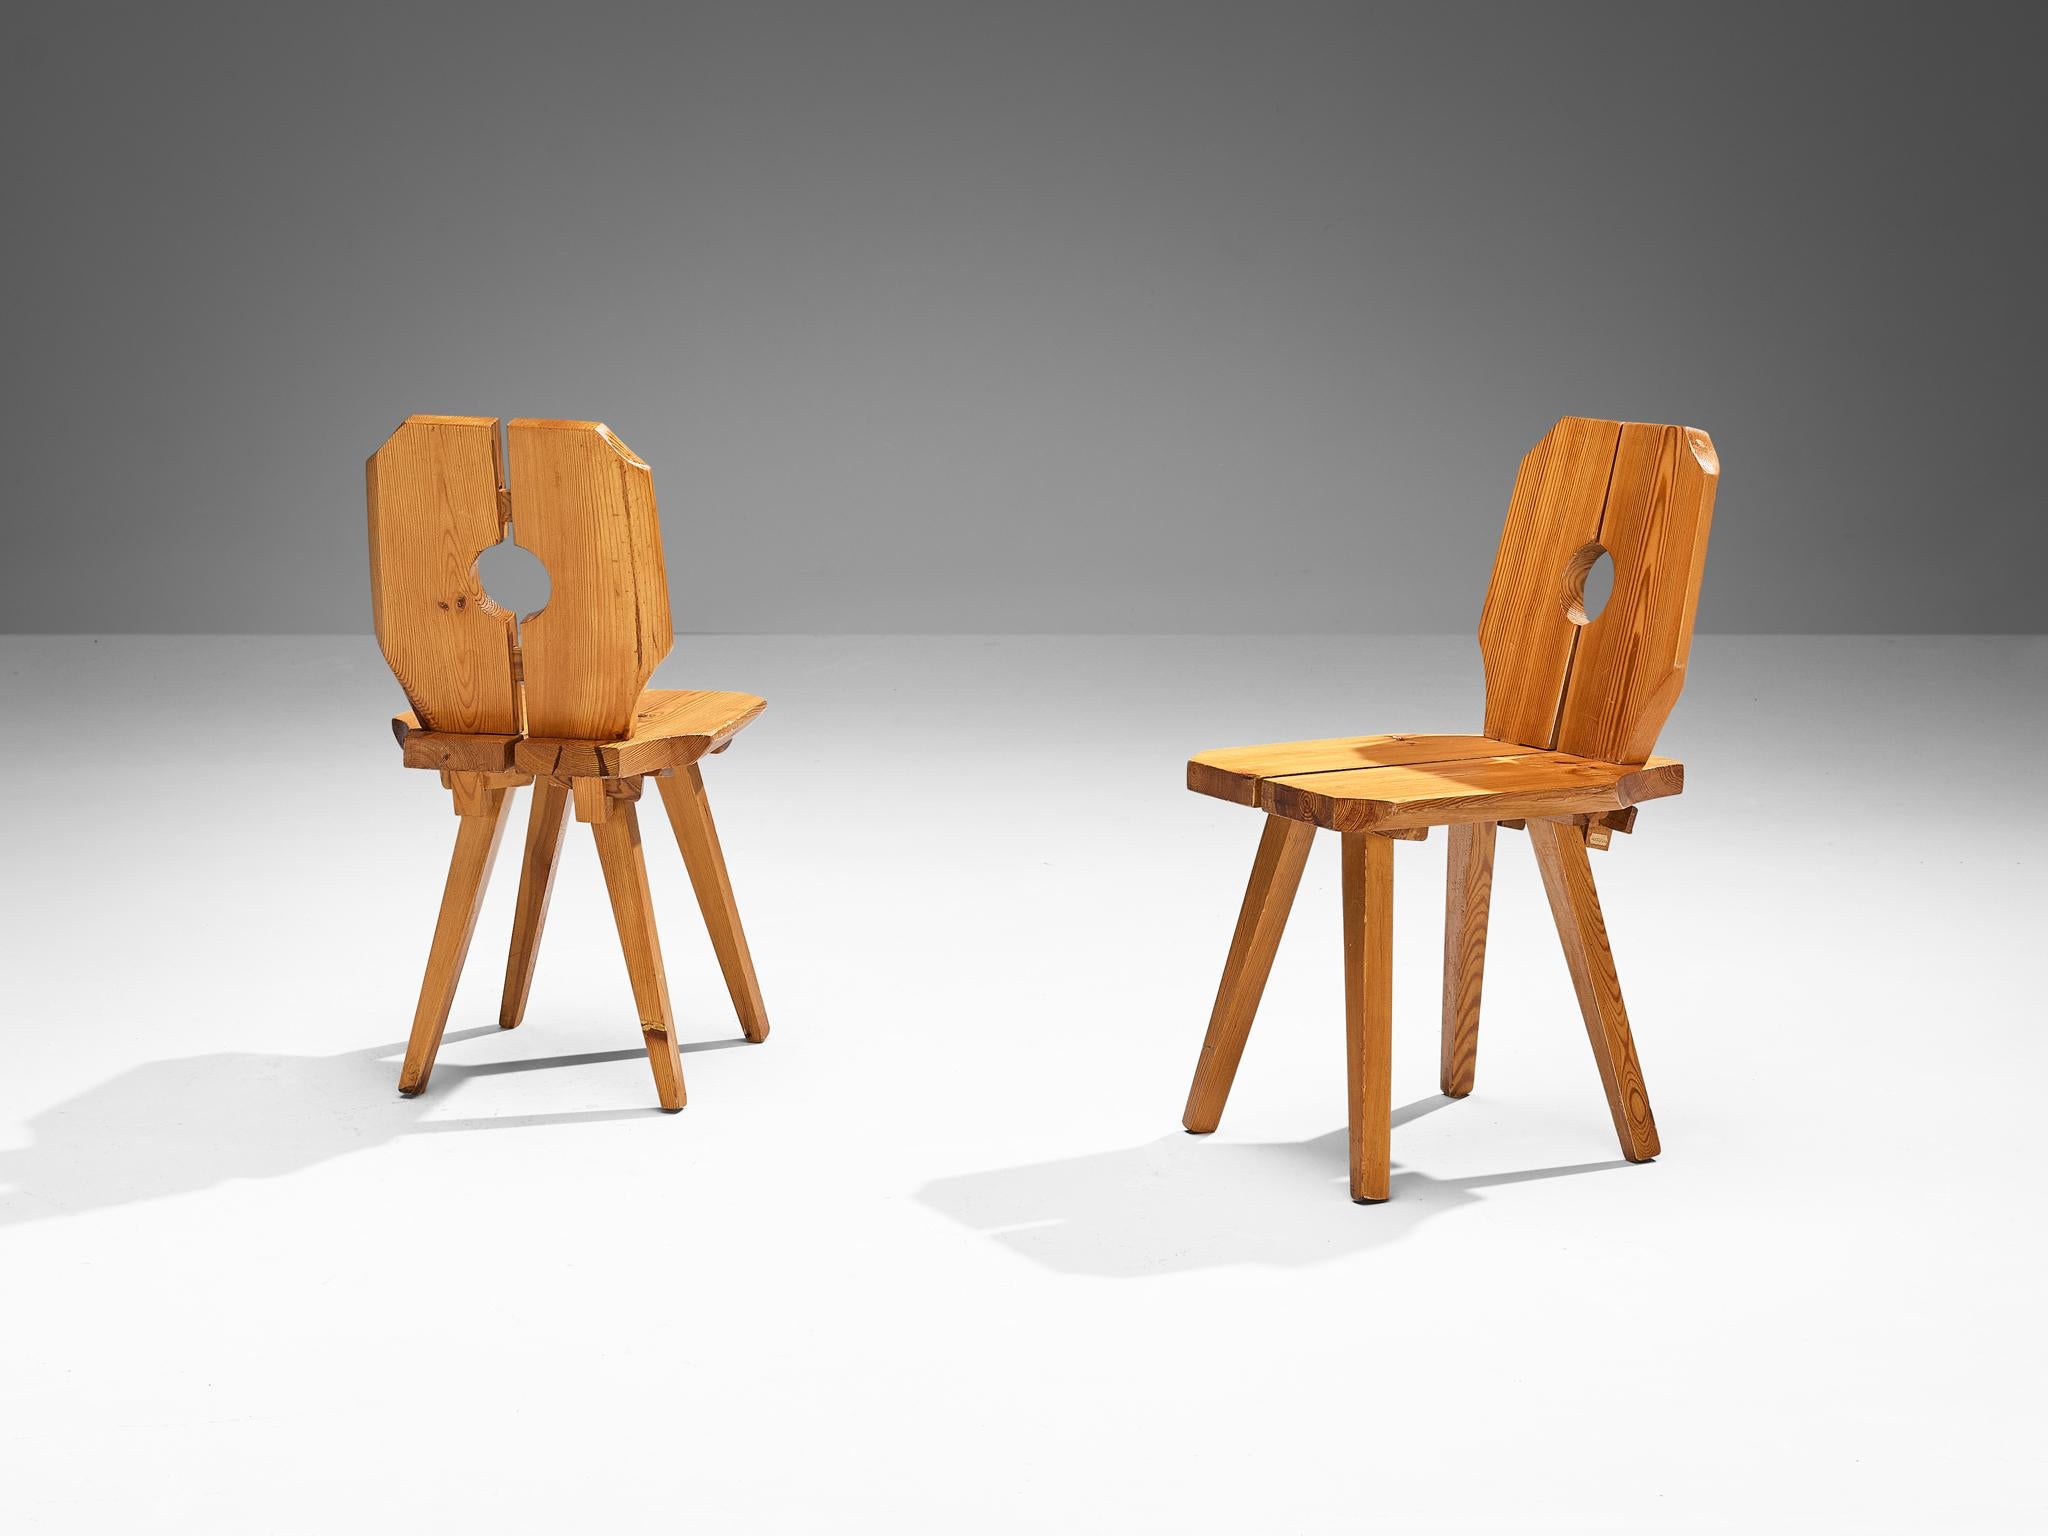 Set of four dining chairs, solid pine, Europe, 1960s

Sculpted dining chairs in expressively grained pine. Multiple features characterize the sculpted look of this set of twelve chairs. Firstly, the polygonal shaped backrest and seat that are parted